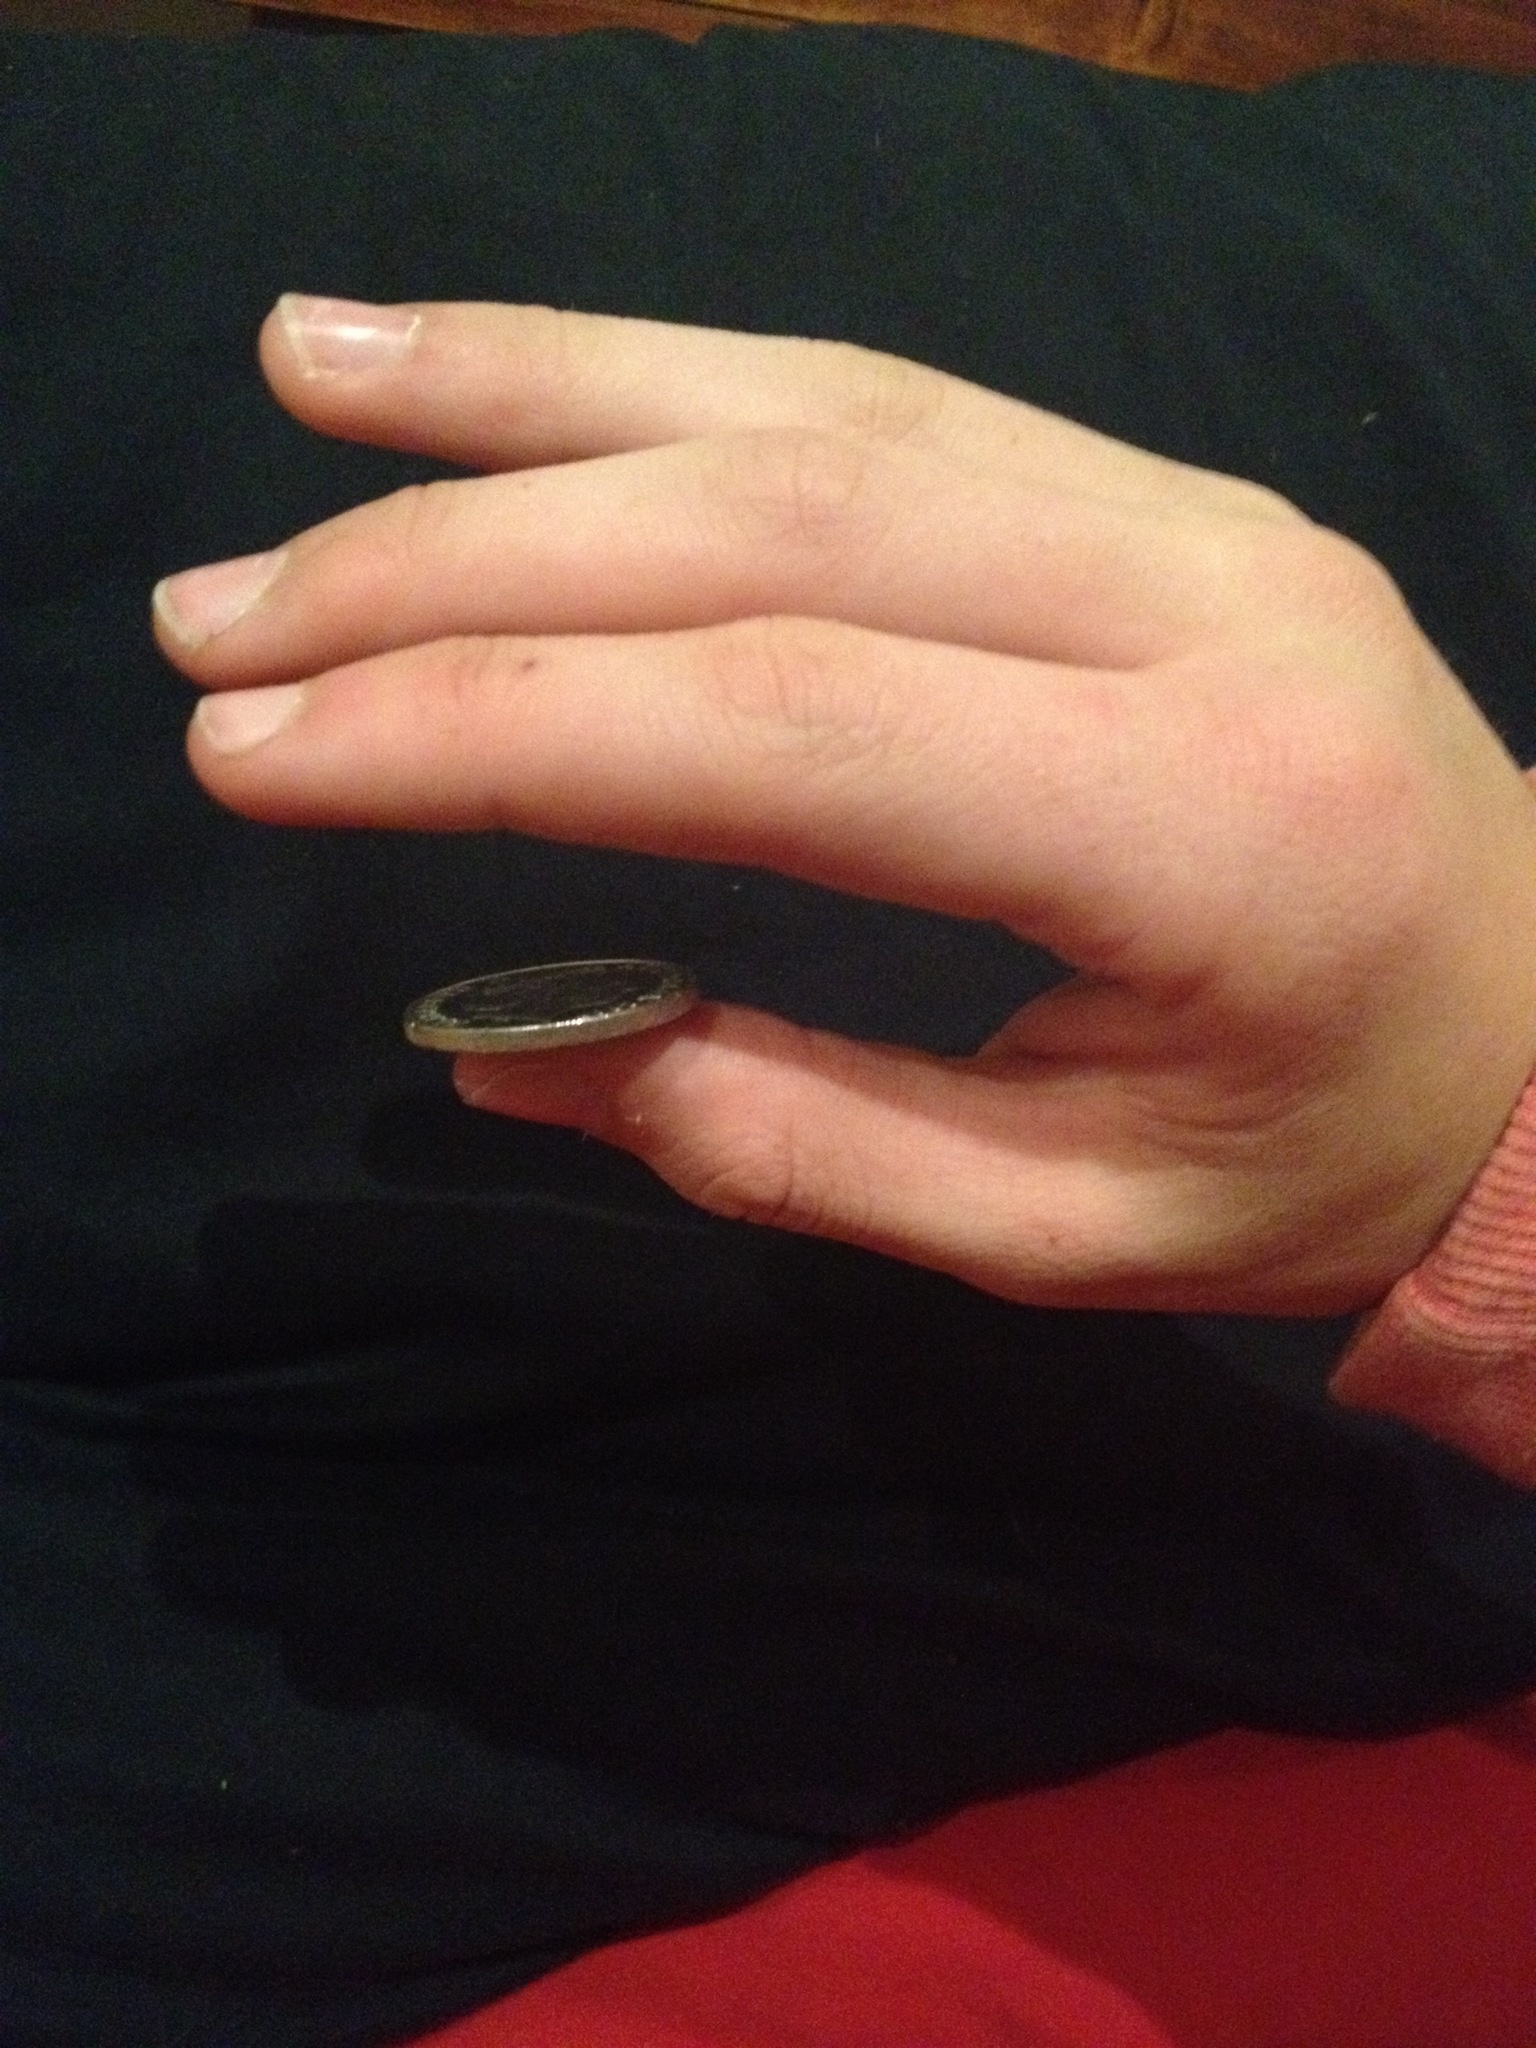 coin over knuckles trick